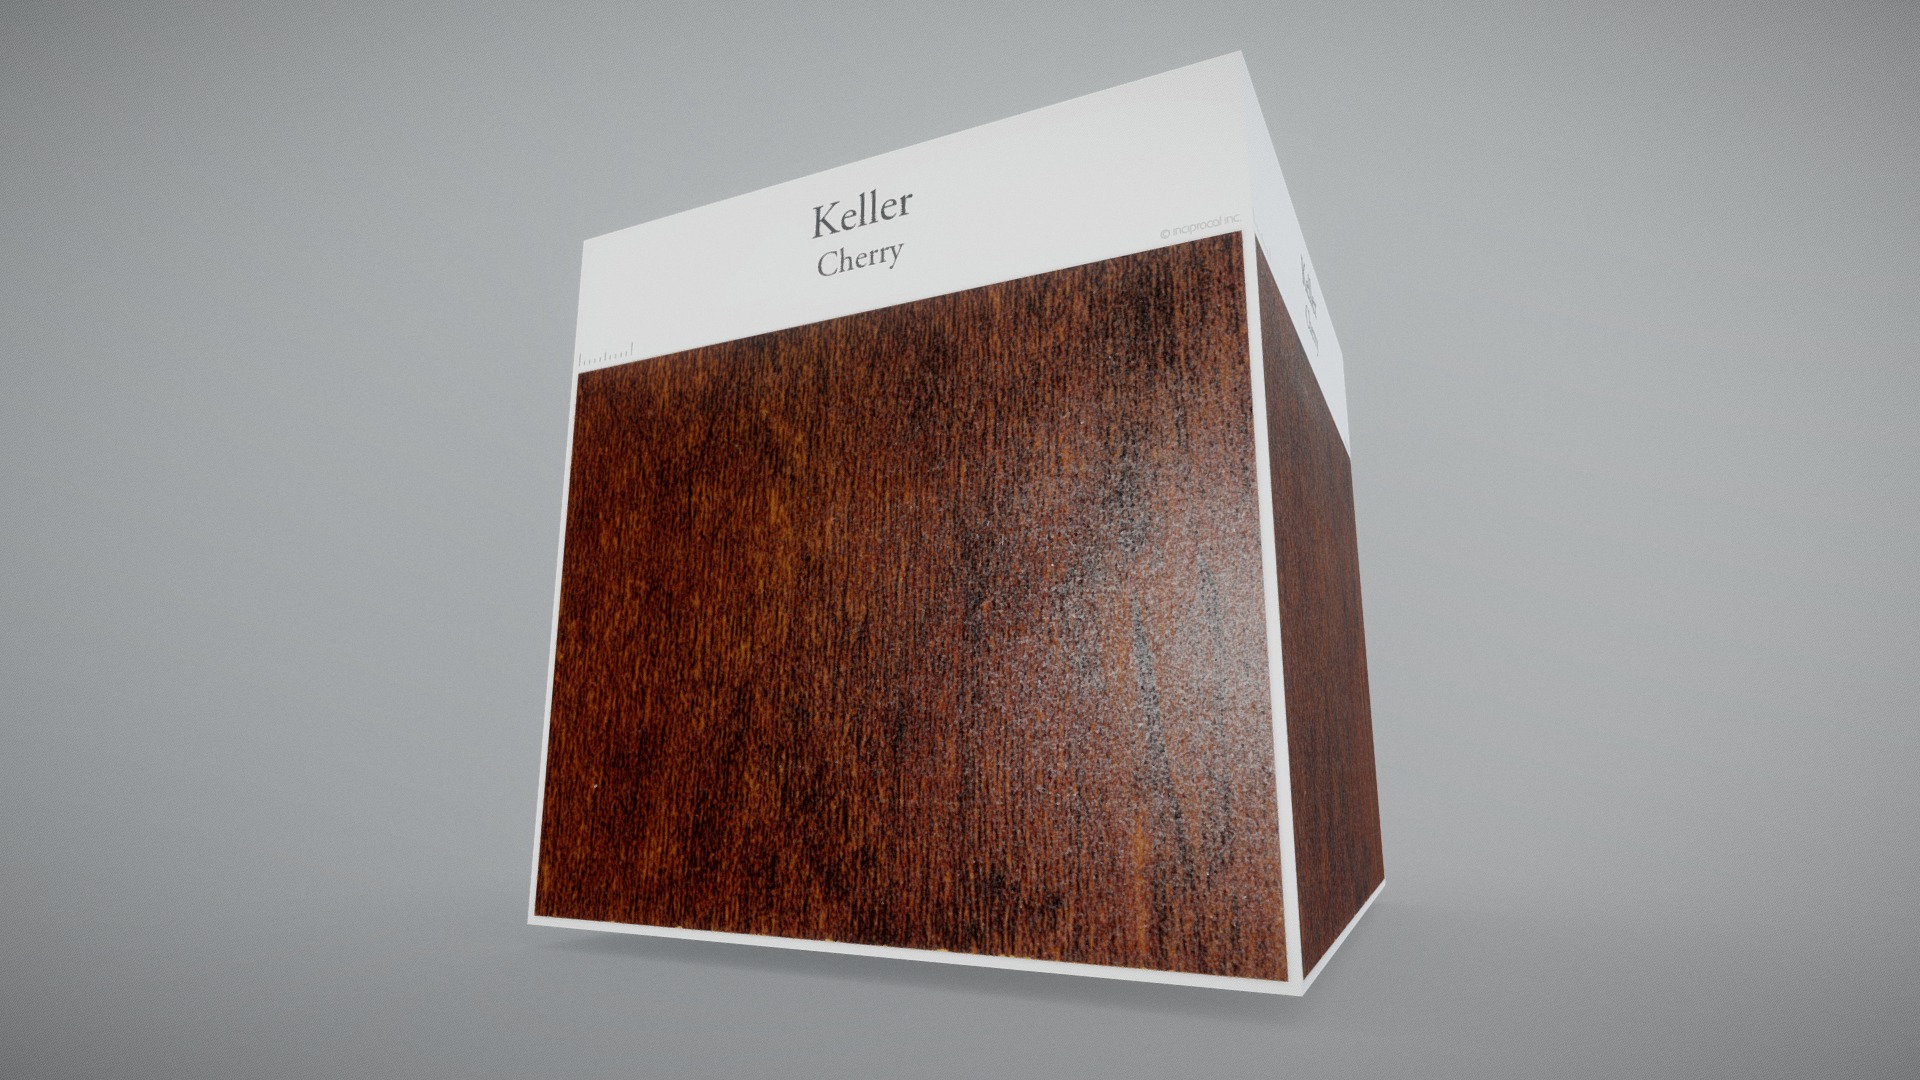 3D model Keller (Cherry) - This is a 3D model of the Keller (Cherry). The 3D model is about a box with a logo on it.